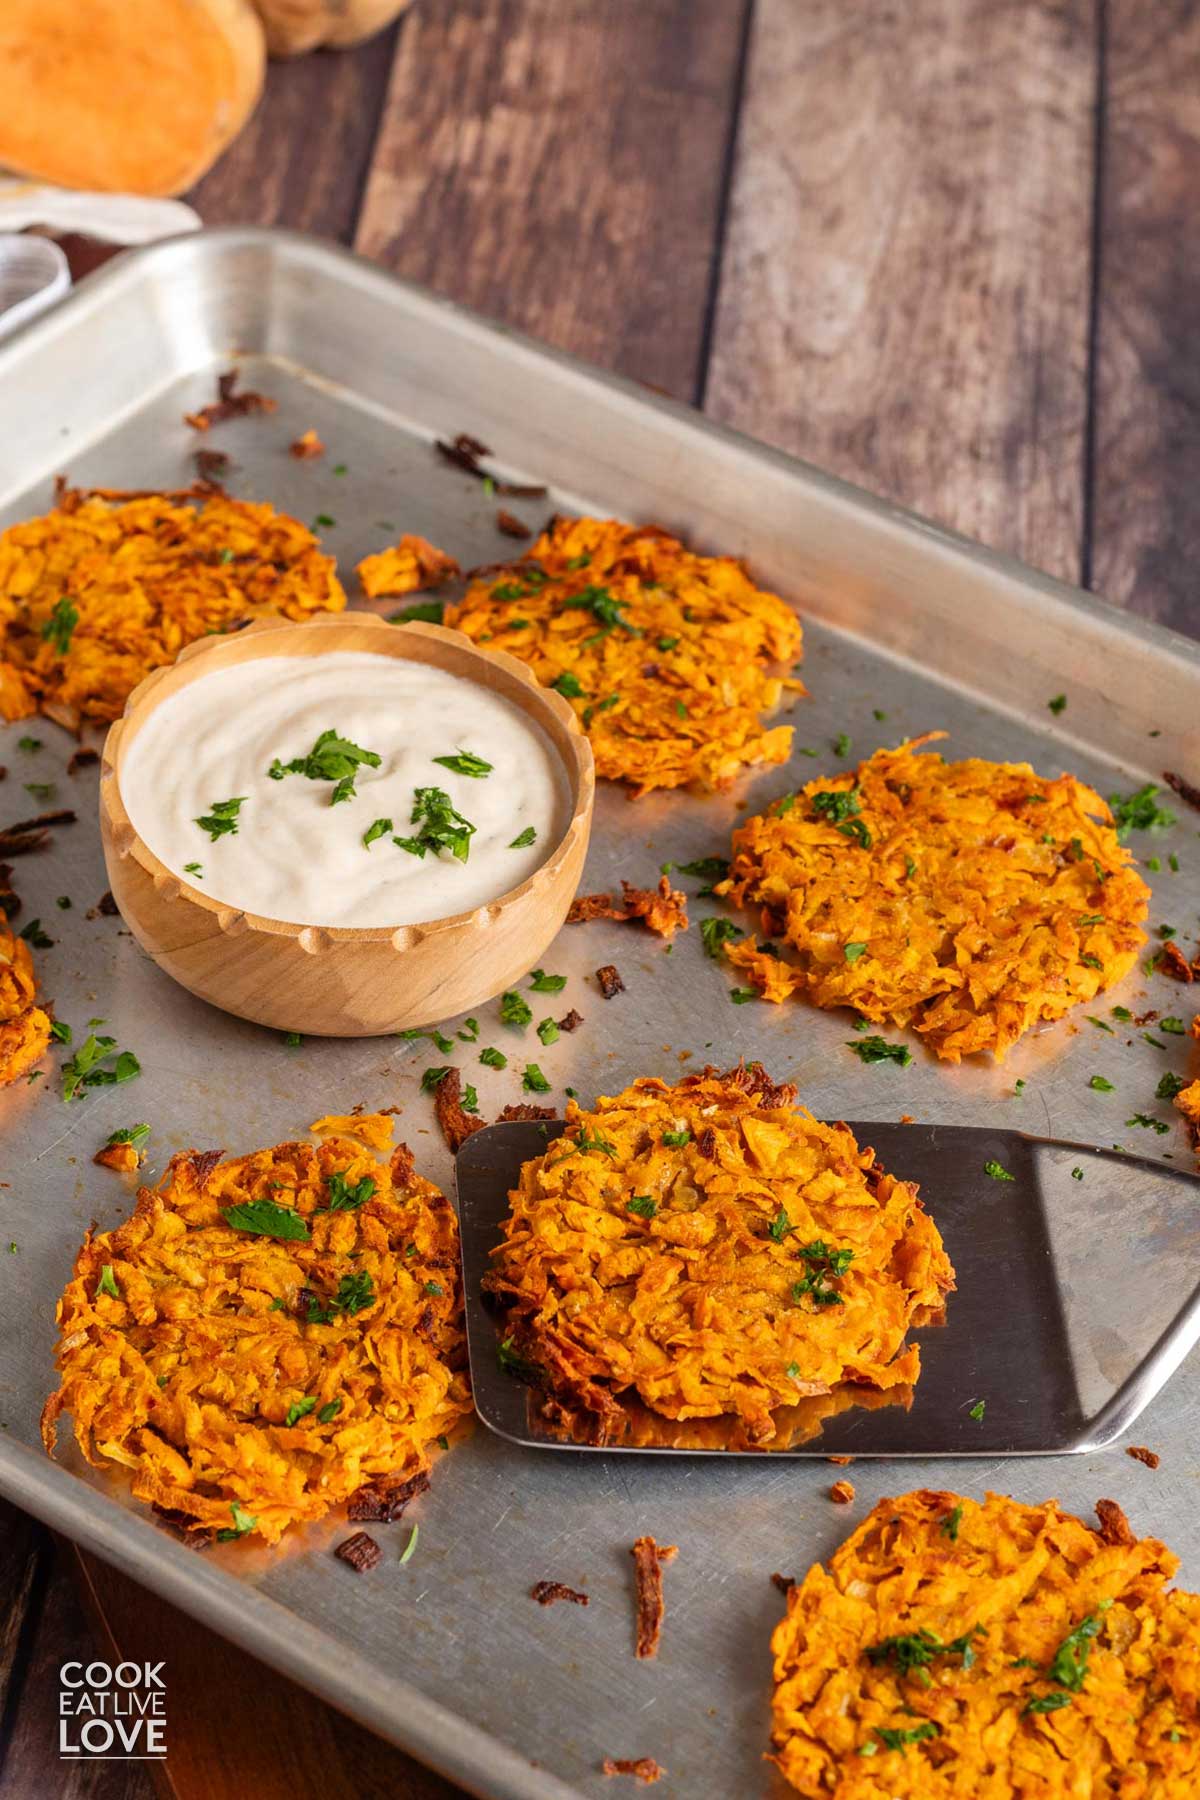 Sweet potato hashbrowns on a baking tray with a small bowl of sauce.